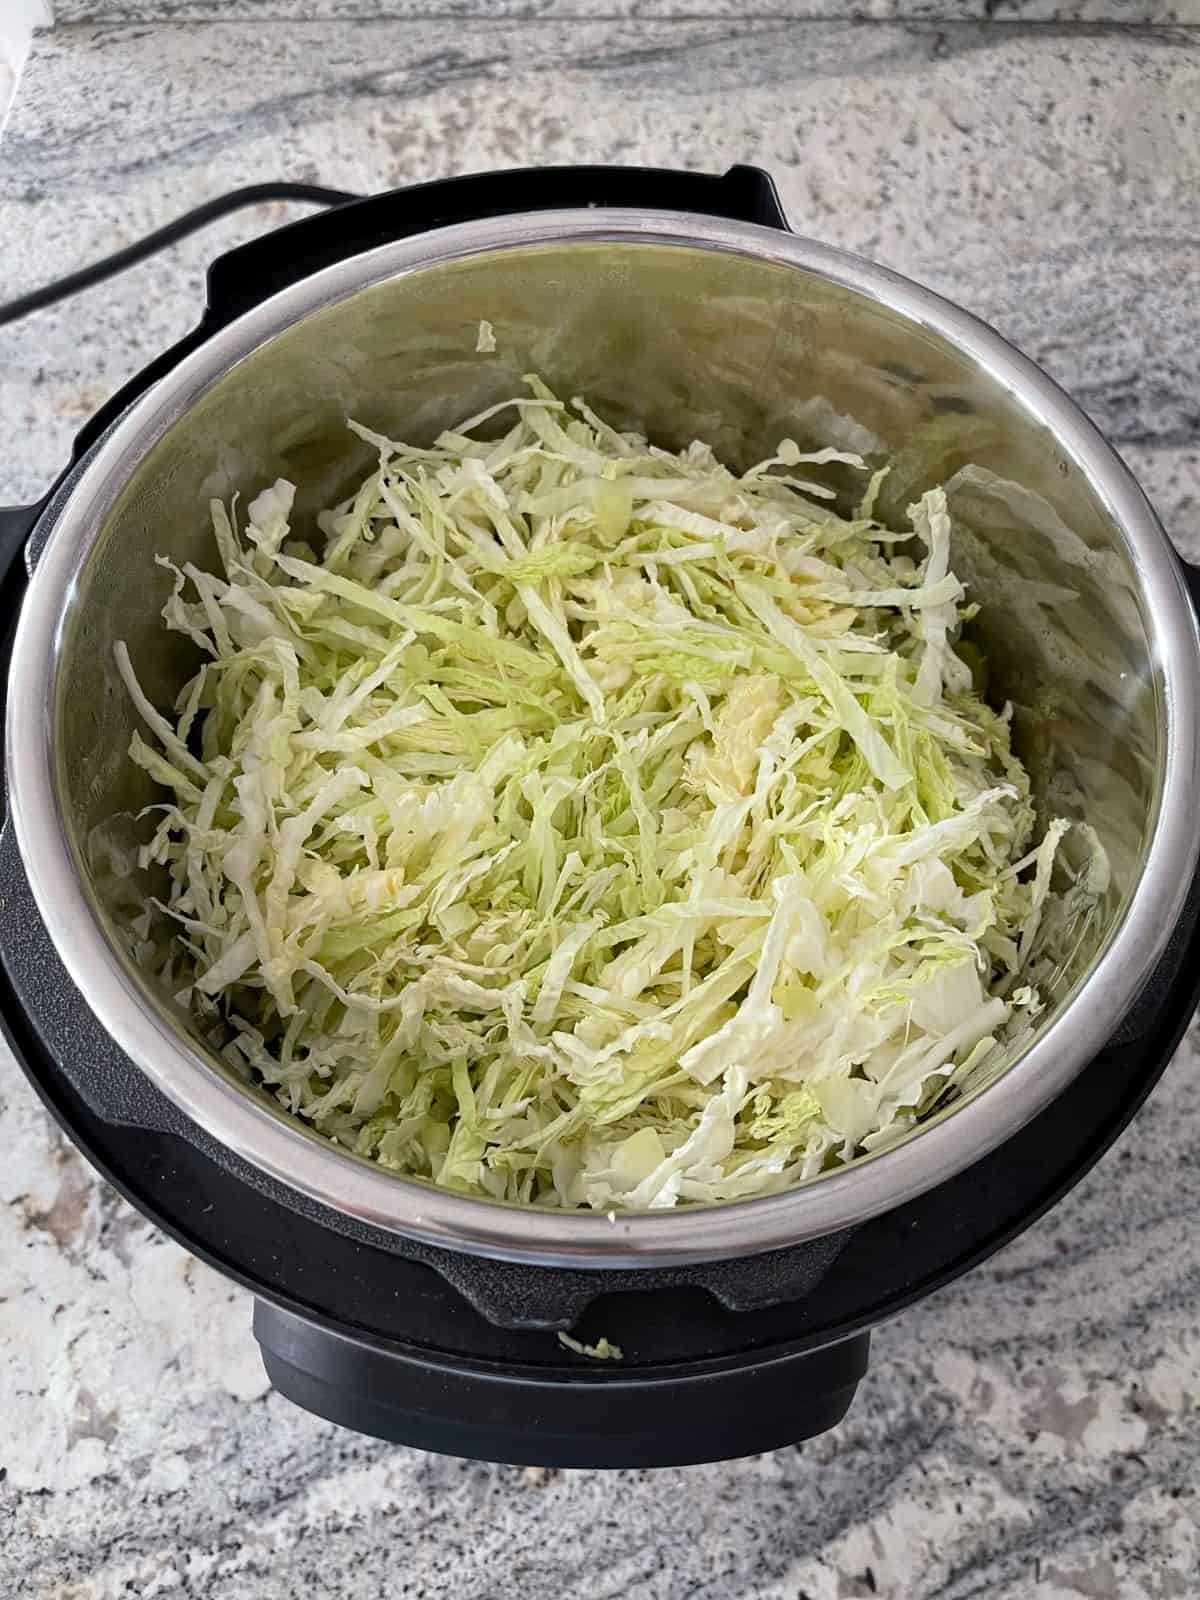 Layering shredded cabbage in Instant Pot for making egg roll bowls.